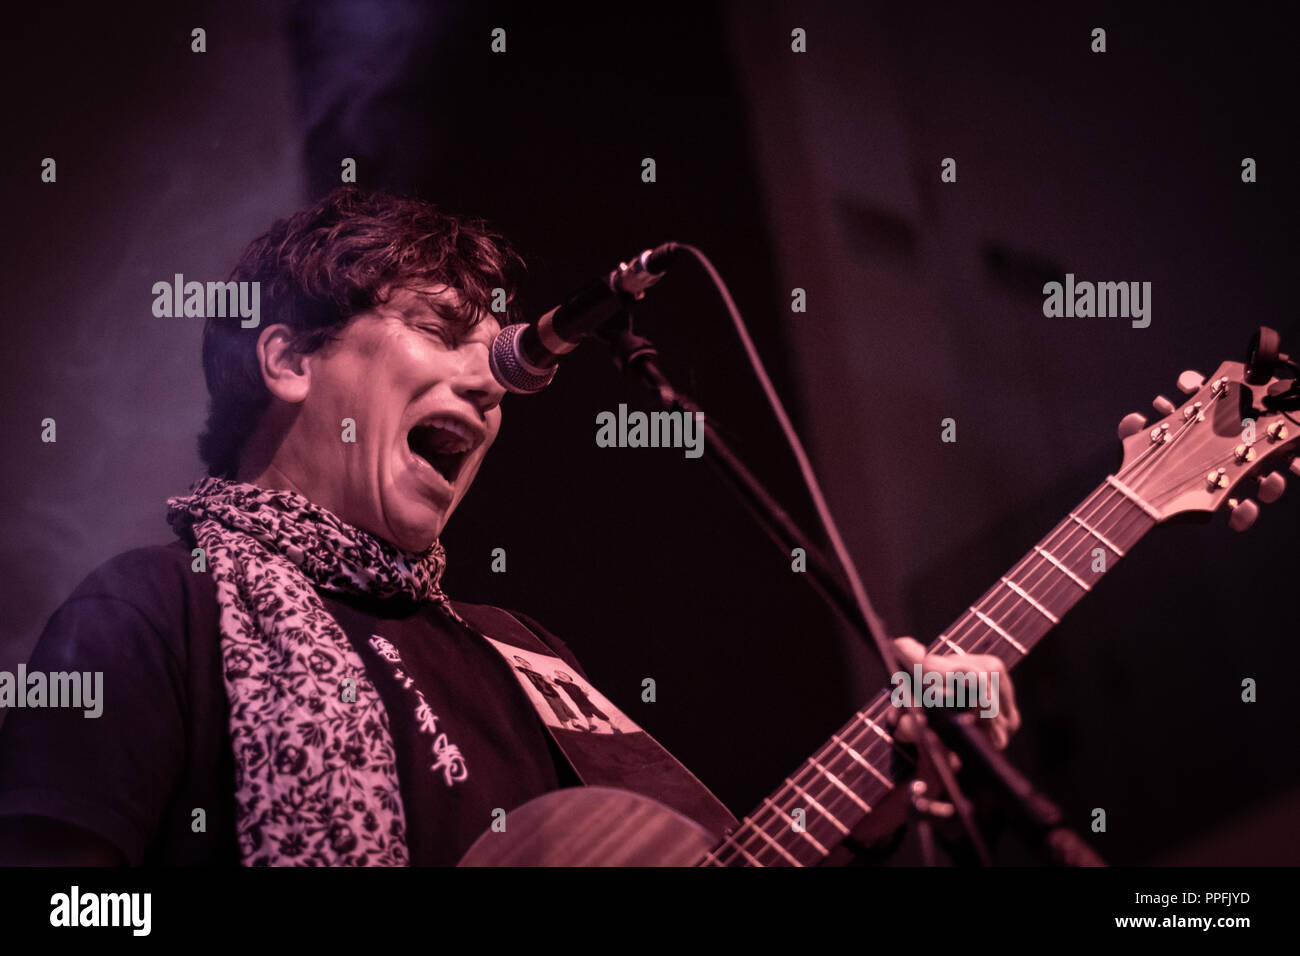 Milan, Italy - September 23, 2018: American rock singer and musician ERIC MARTIN performs at Slaughter Club. Brambilla Simone Live News photographer Stock Photo